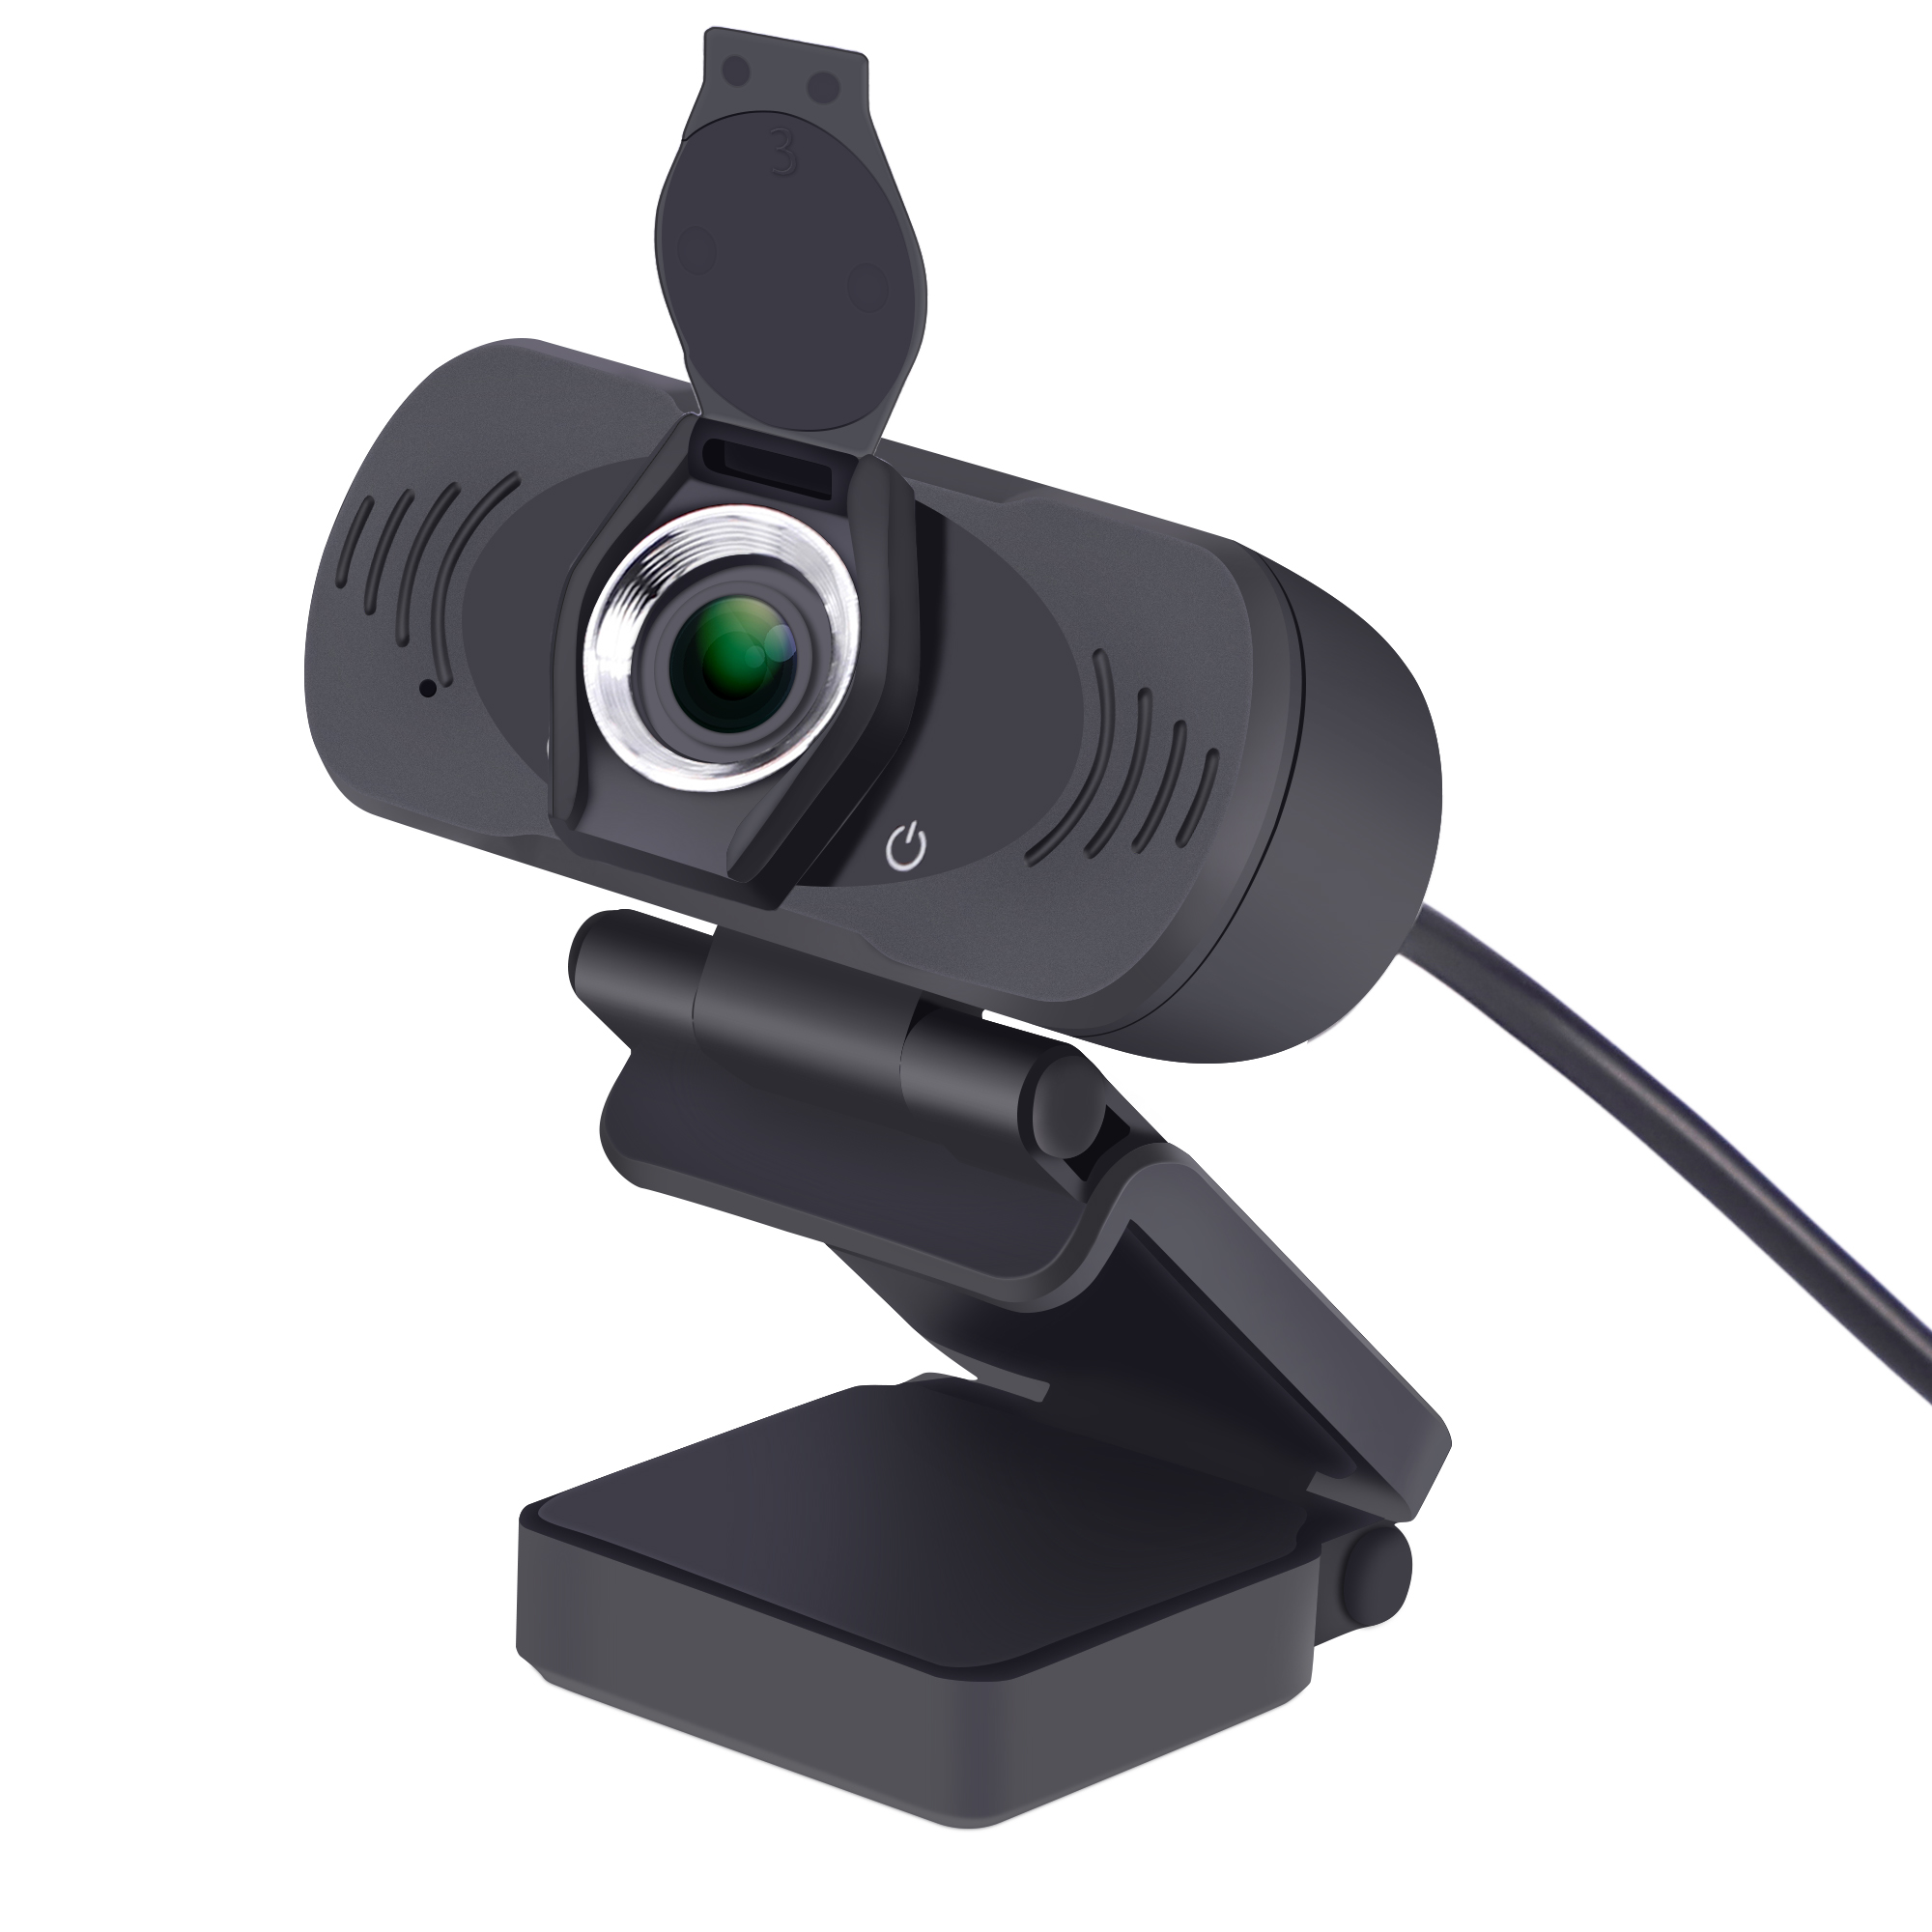 Full HD 1080P Webcam with privacy filter and tripod, Plug & Play USB WebCam 1080P HD with Microphone 